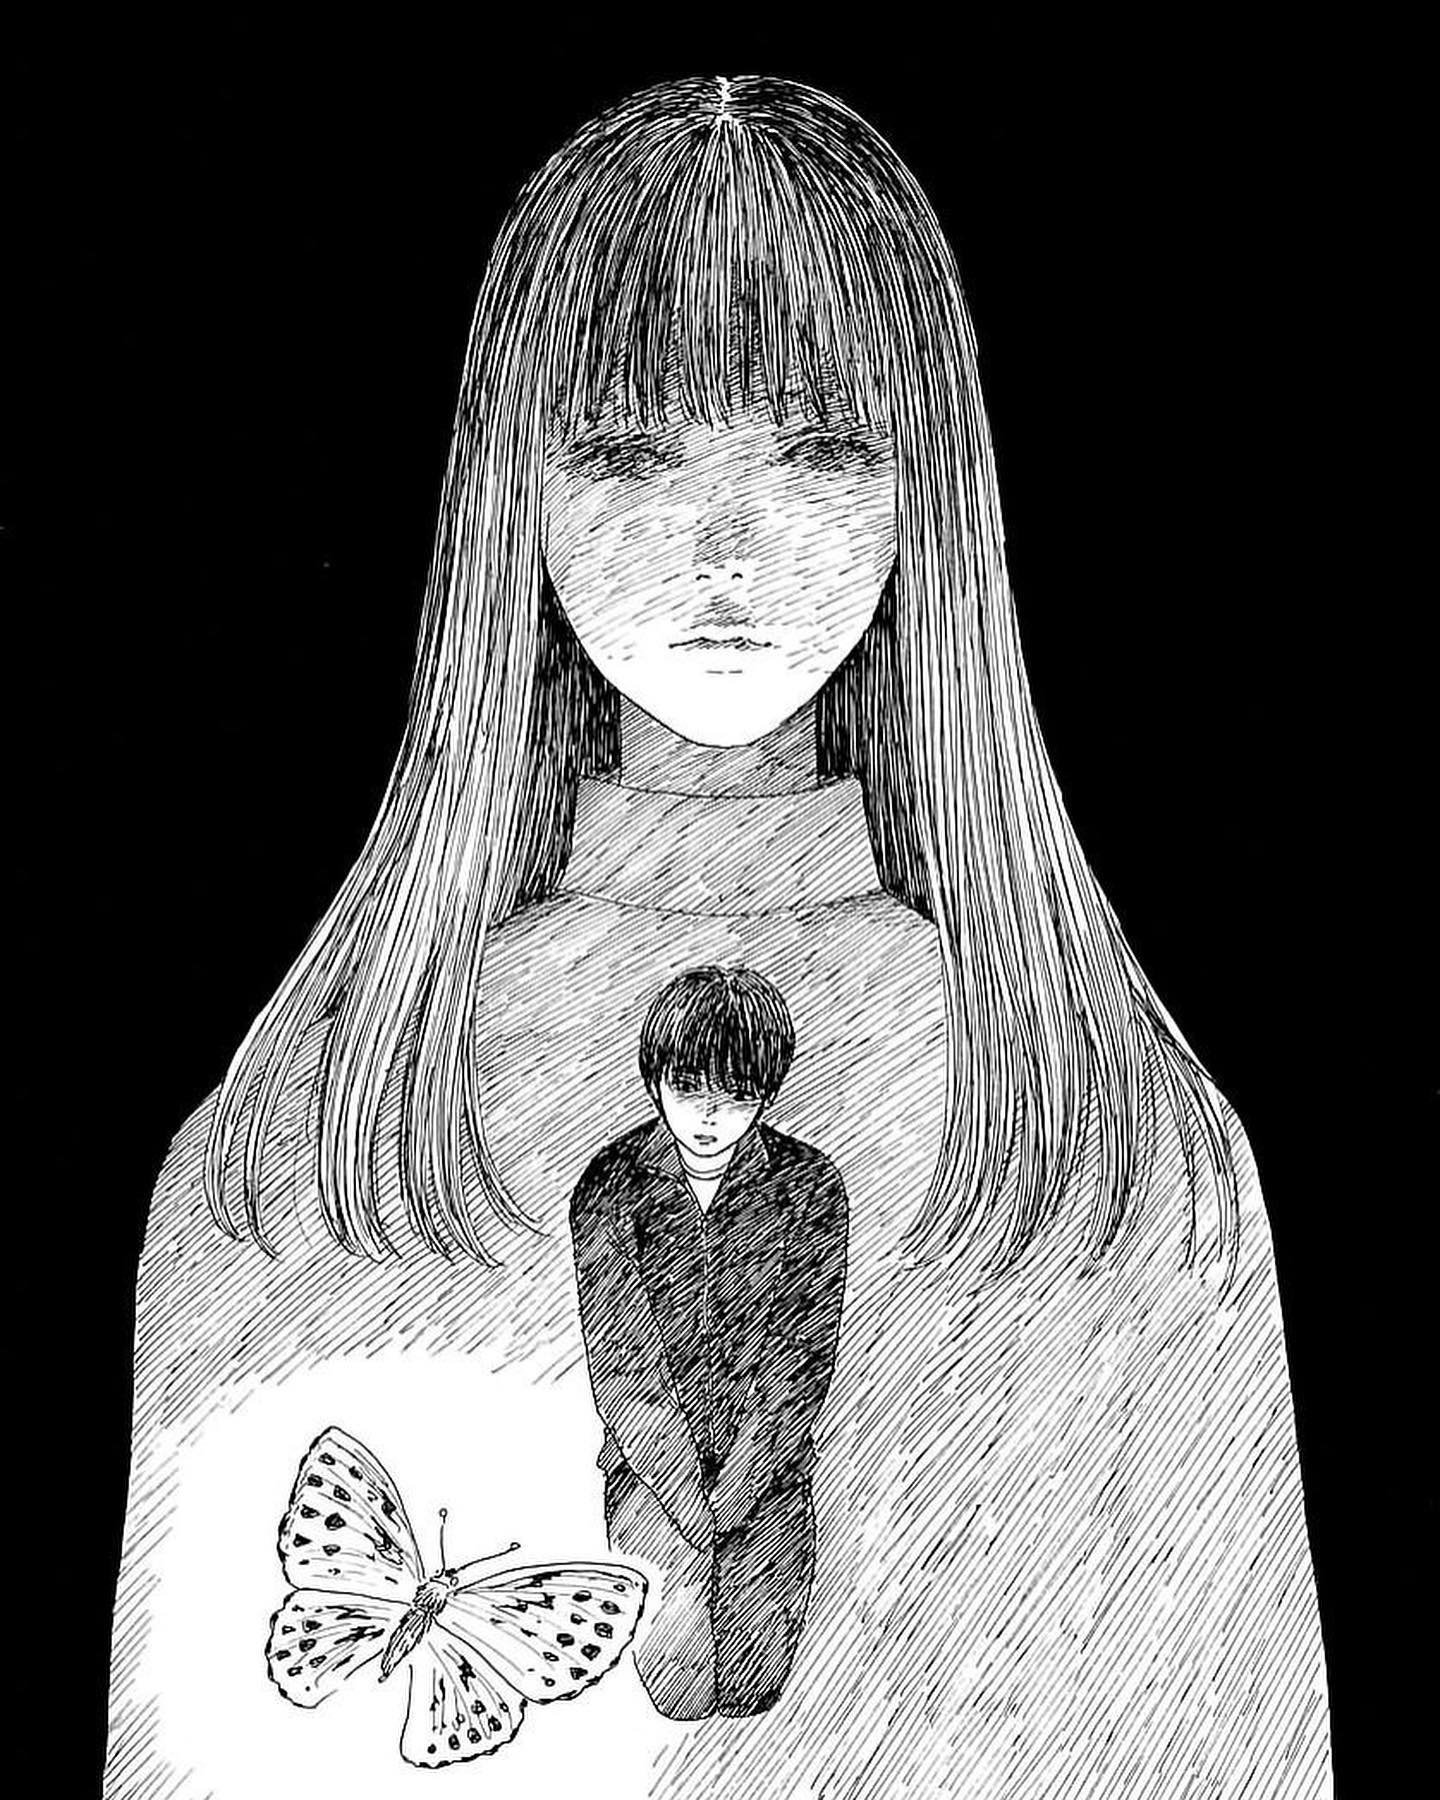 Can we appreciate the Great Oshimi Shuzo works? Like Aku no Hana(The flower  of evil), Happiness and this Chi no Wadachi(Trails of blood). - 9GAG